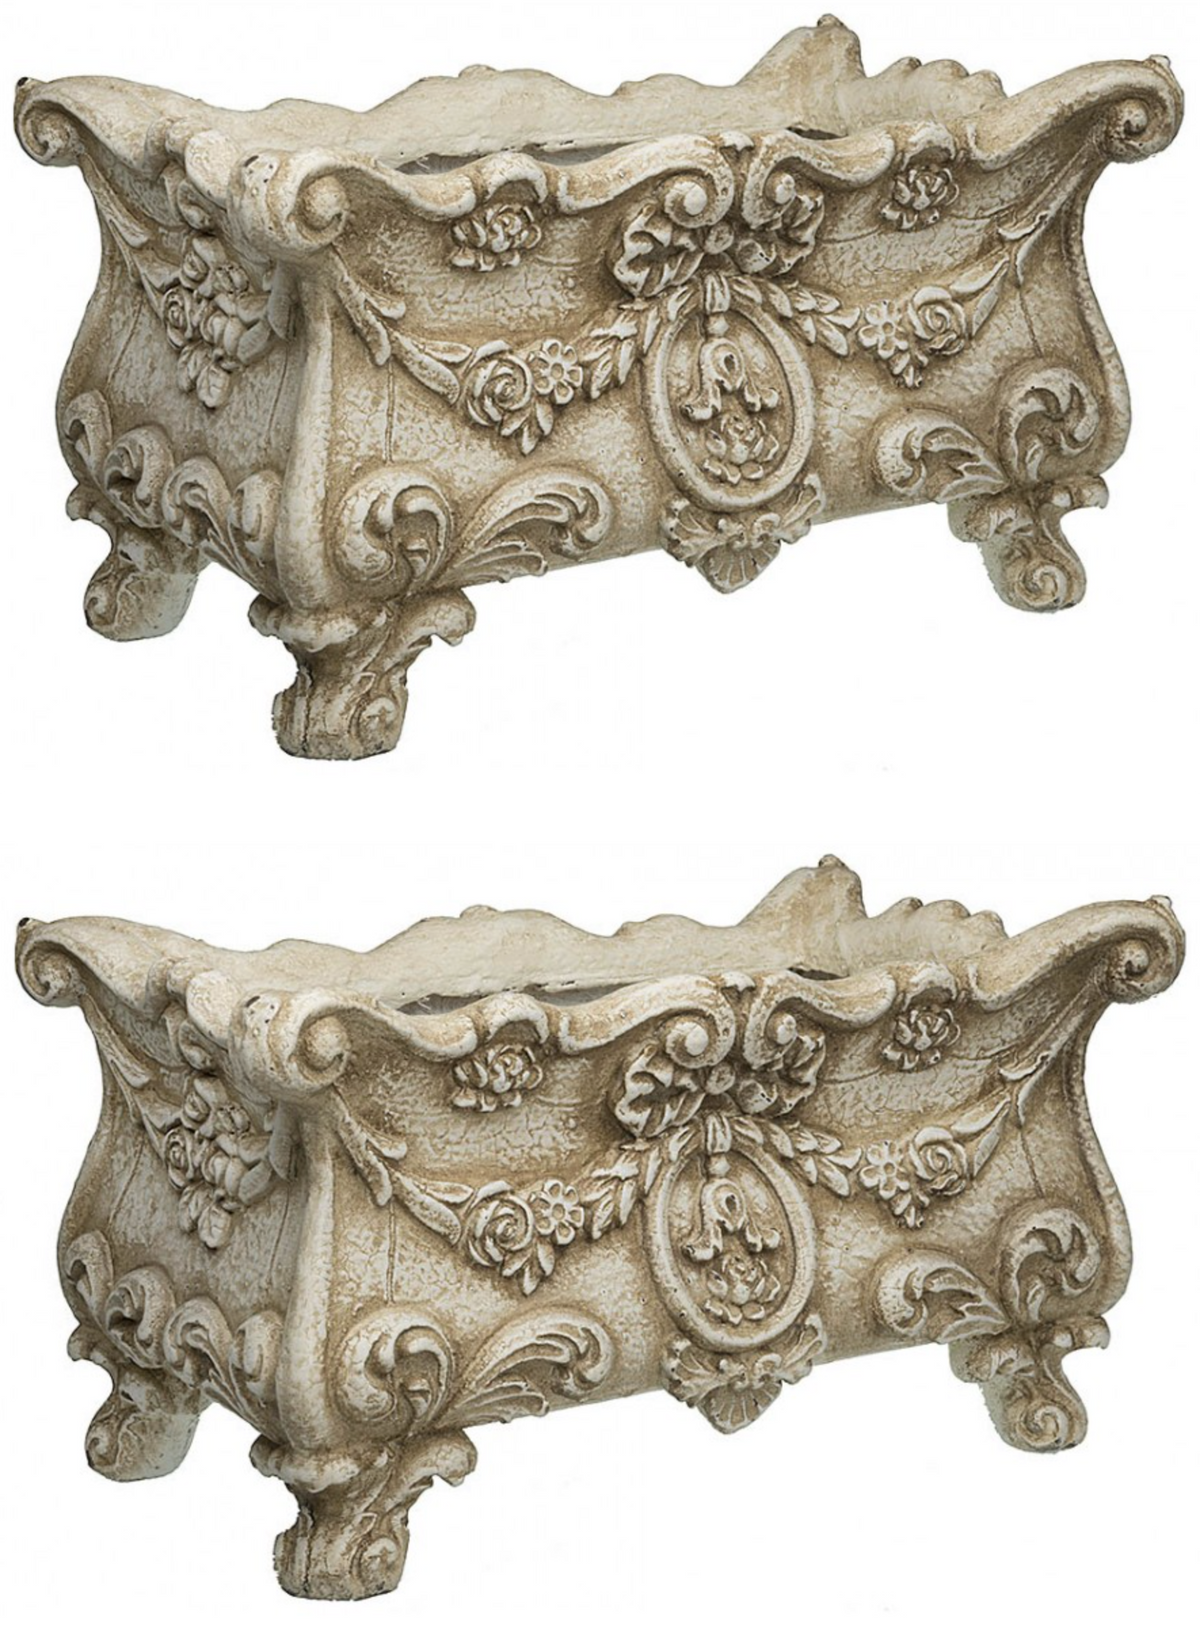 Antique Reproduction Planter with Distressed Cream Finish, Set of 2